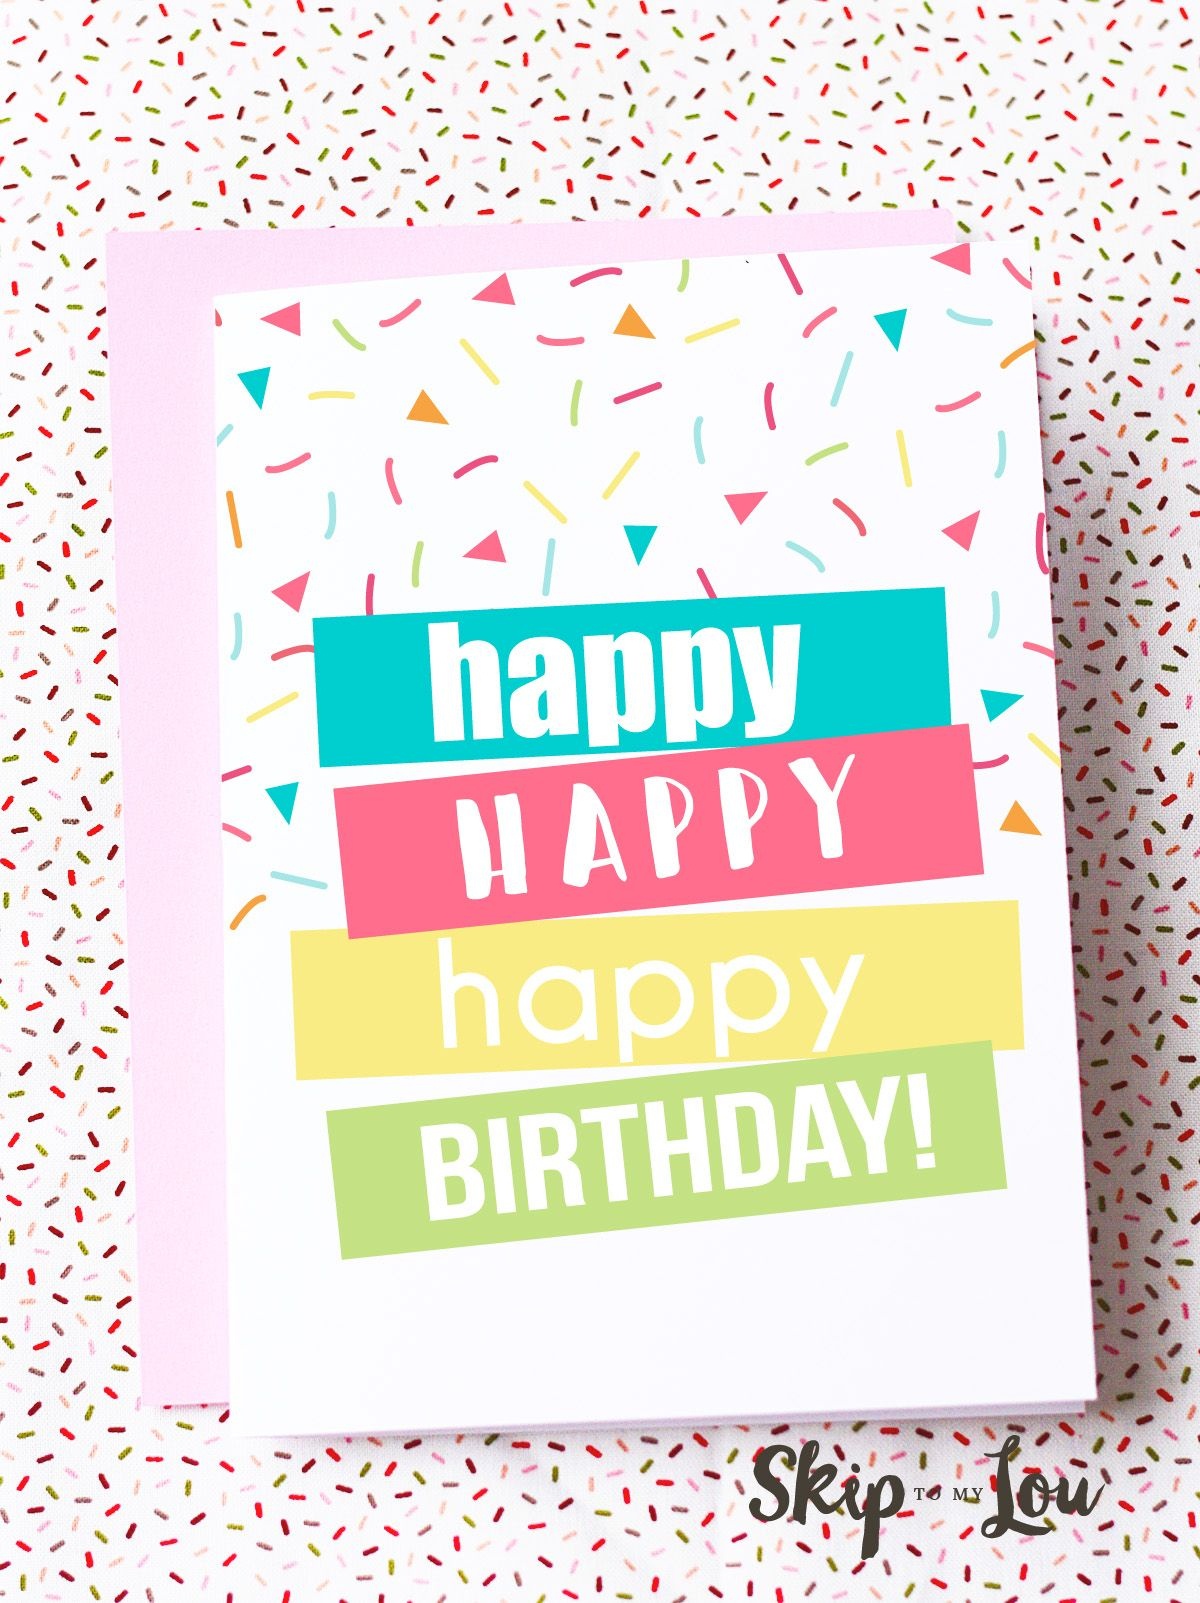 how-to-make-birthday-cards-at-home-homemade-birthday-cards-for-kids-to